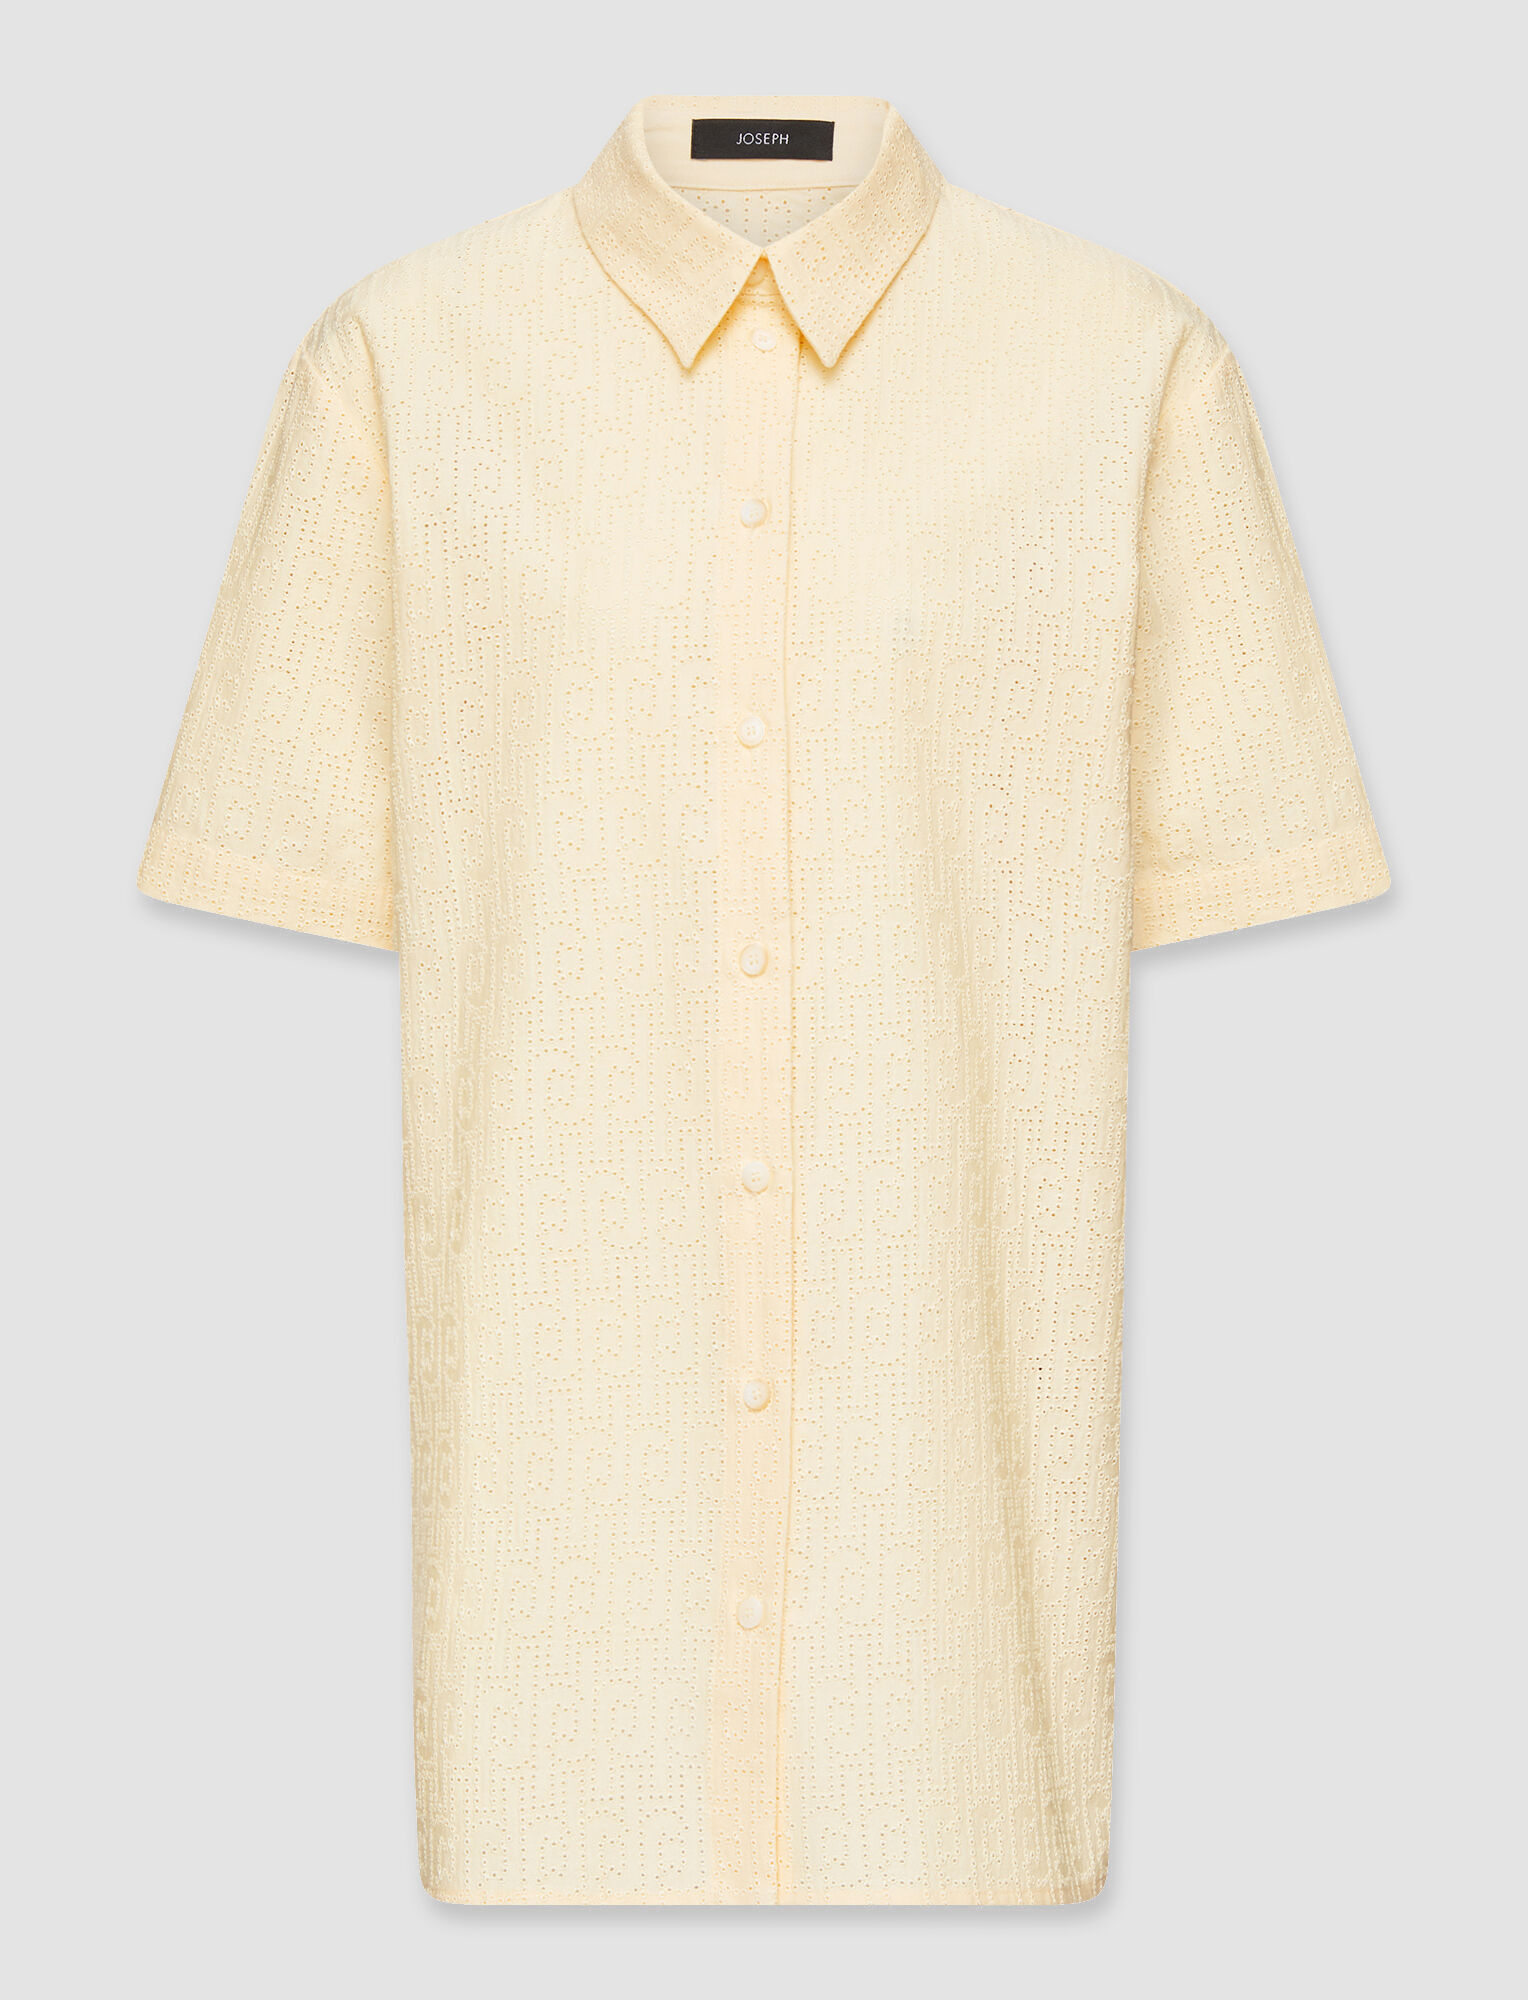 Joseph, Broderie Anglaise Bleni Top, in Corn